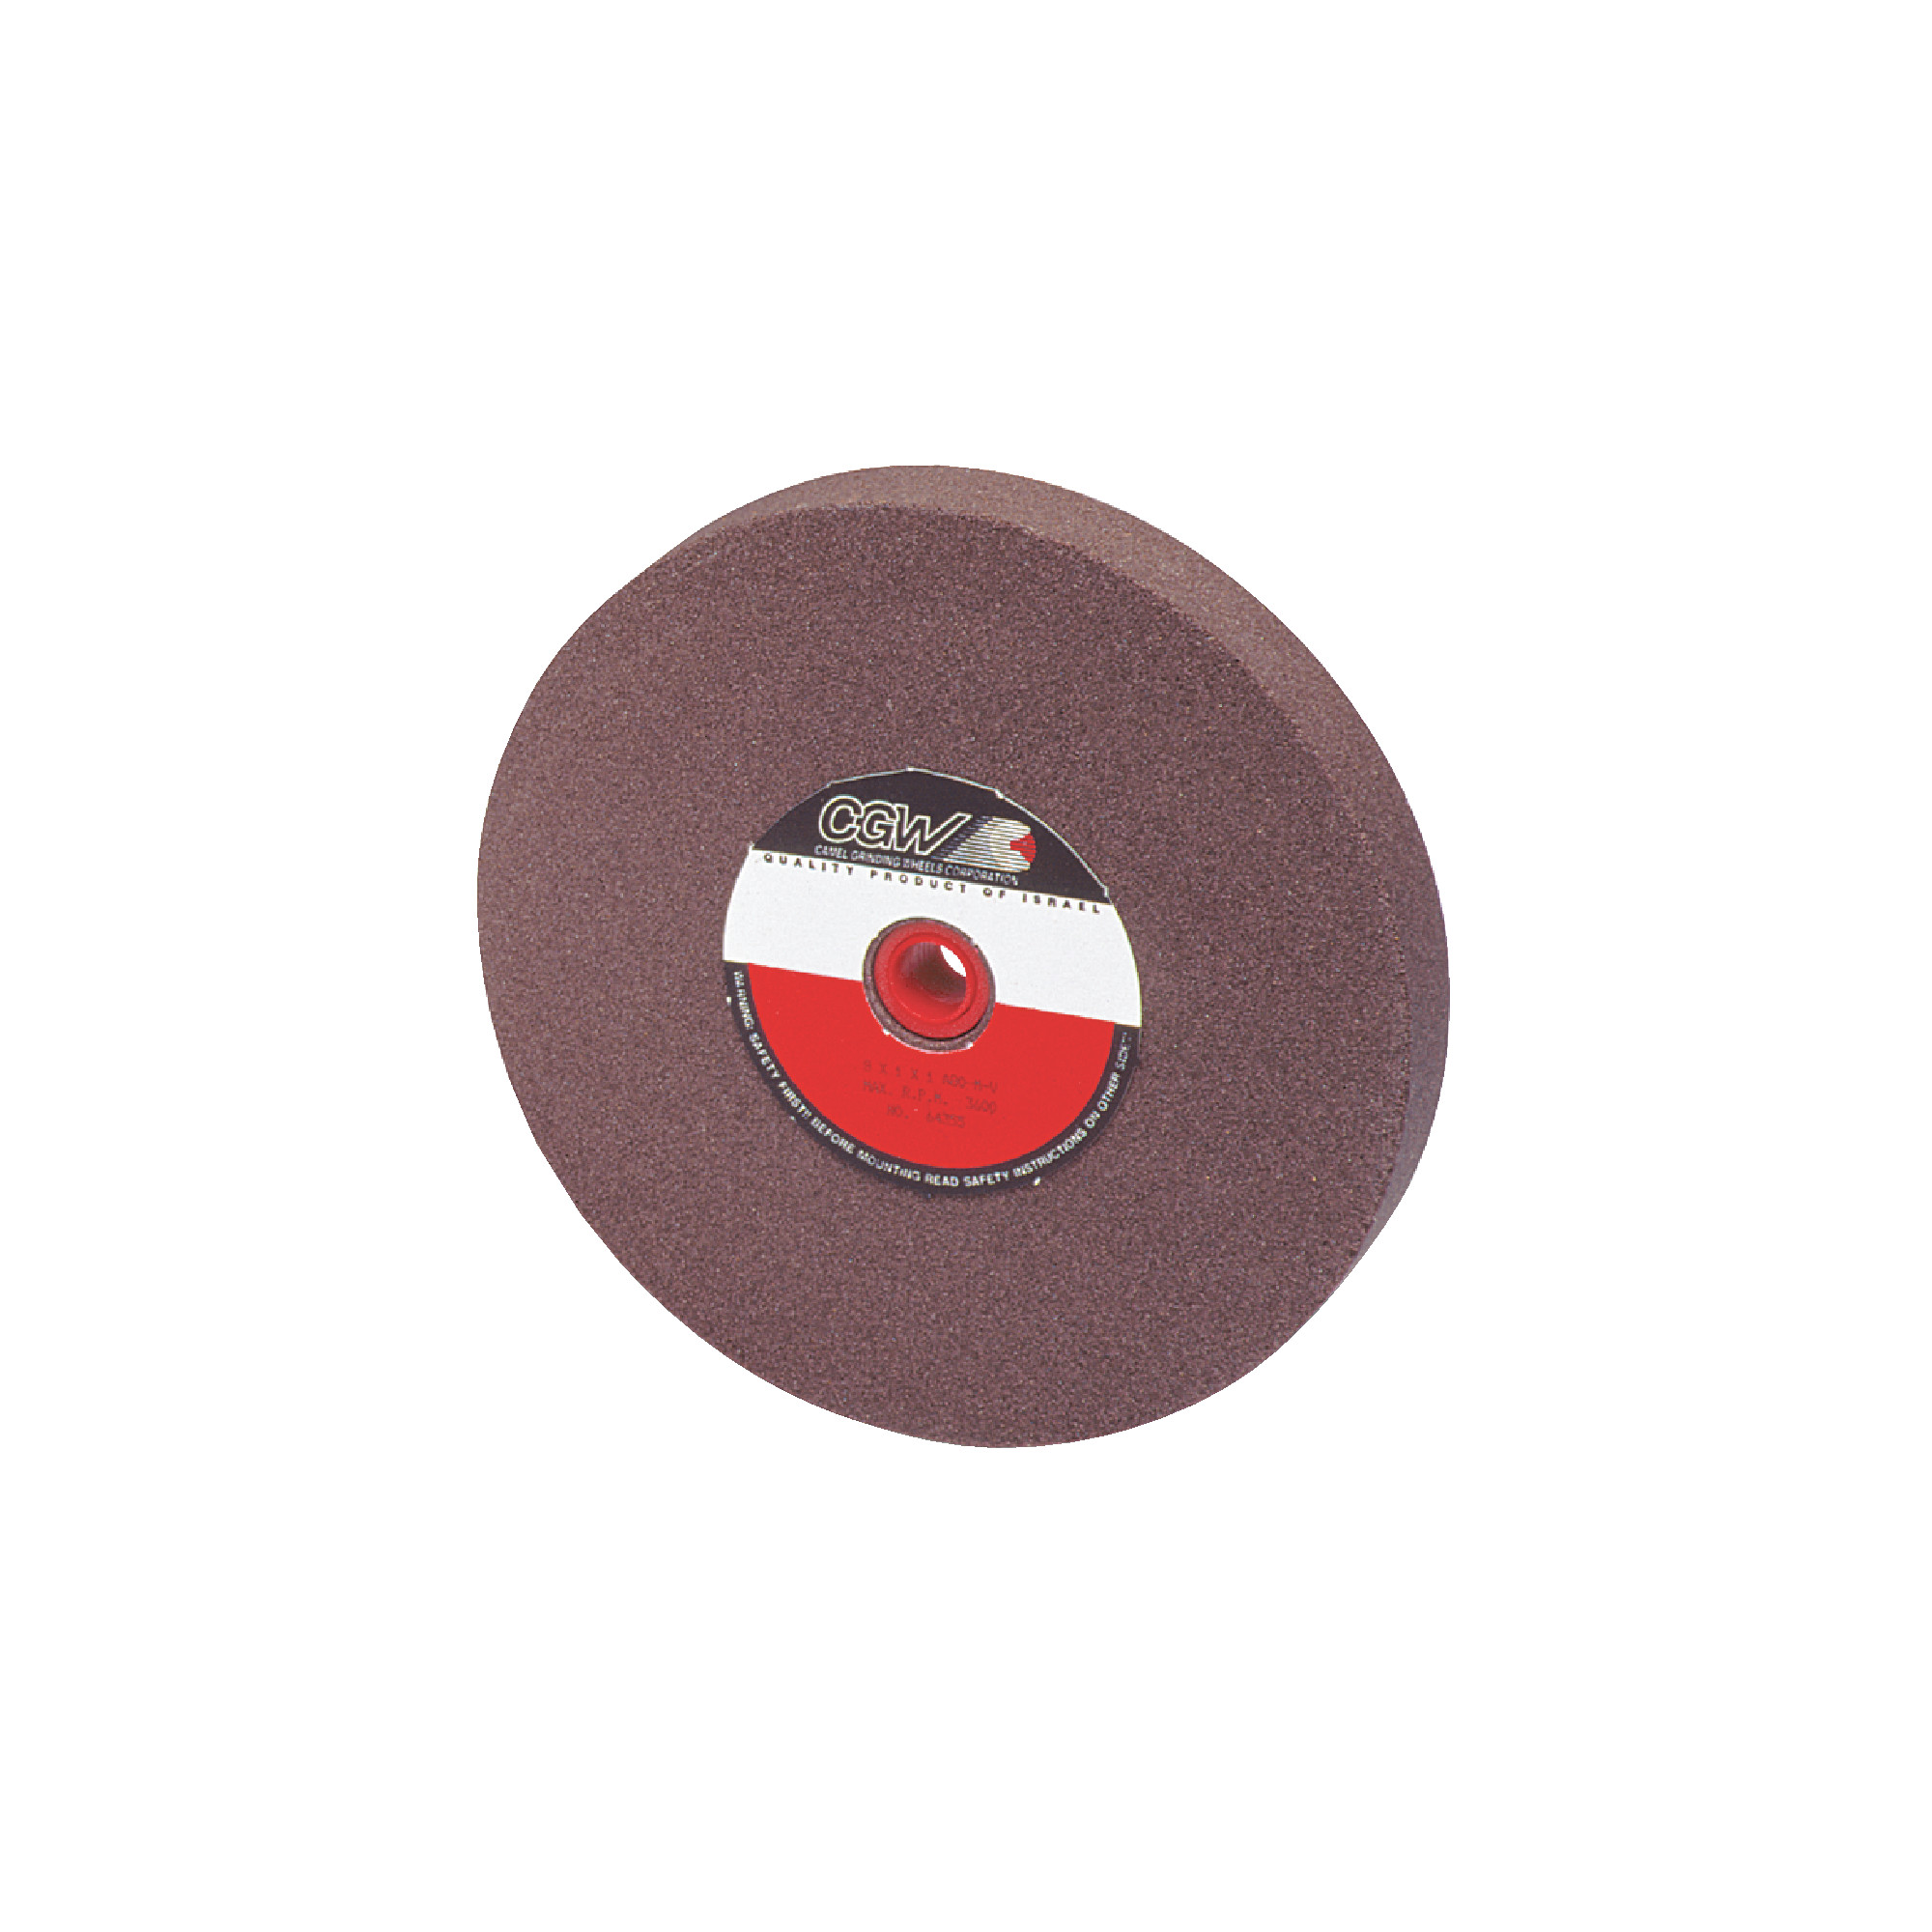 Brown Aluminum Oxide Bench And Pedestal Grinding Wheel